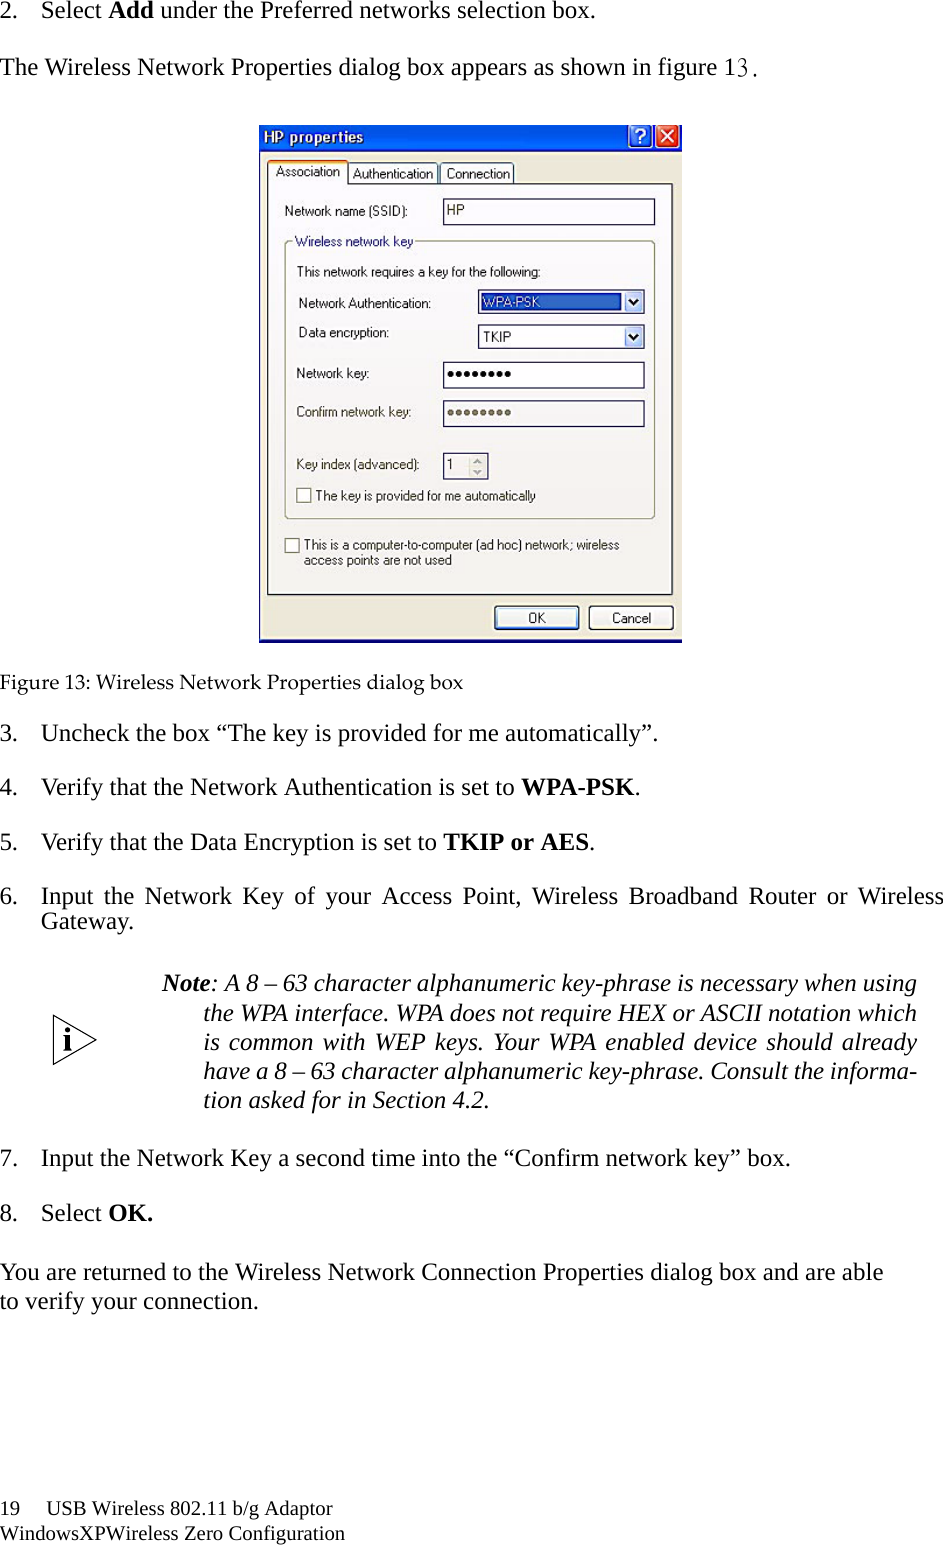 19     USB Wireless 802.11 b/g AdaptorWindowsXPWireless Zero Configuration2. Select Add under the Preferred networks selection box. The Wireless Network Properties dialog box appears as shown in figure 13.Figure13:WirelessNetworkPropertiesdialogbox3. Uncheck the box “The key is provided for me automatically”.4. Verify that the Network Authentication is set to WPA-PSK.5. Verify that the Data Encryption is set to TKIP or AES.6. Input the Network Key of your Access Point, Wireless Broadband Router or WirelessGateway.7. Input the Network Key a second time into the “Confirm network key” box.8. Select OK.You are returned to the Wireless Network Connection Properties dialog box and are ableto verify your connection.Note: A 8 – 63 character alphanumeric key-phrase is necessary when usingthe WPA interface. WPA does not require HEX or ASCII notation whichis common with WEP keys. Your WPA enabled device should alreadyhave a 8 – 63 character alphanumeric key-phrase. Consult the informa-tion asked for in Section 4.2.